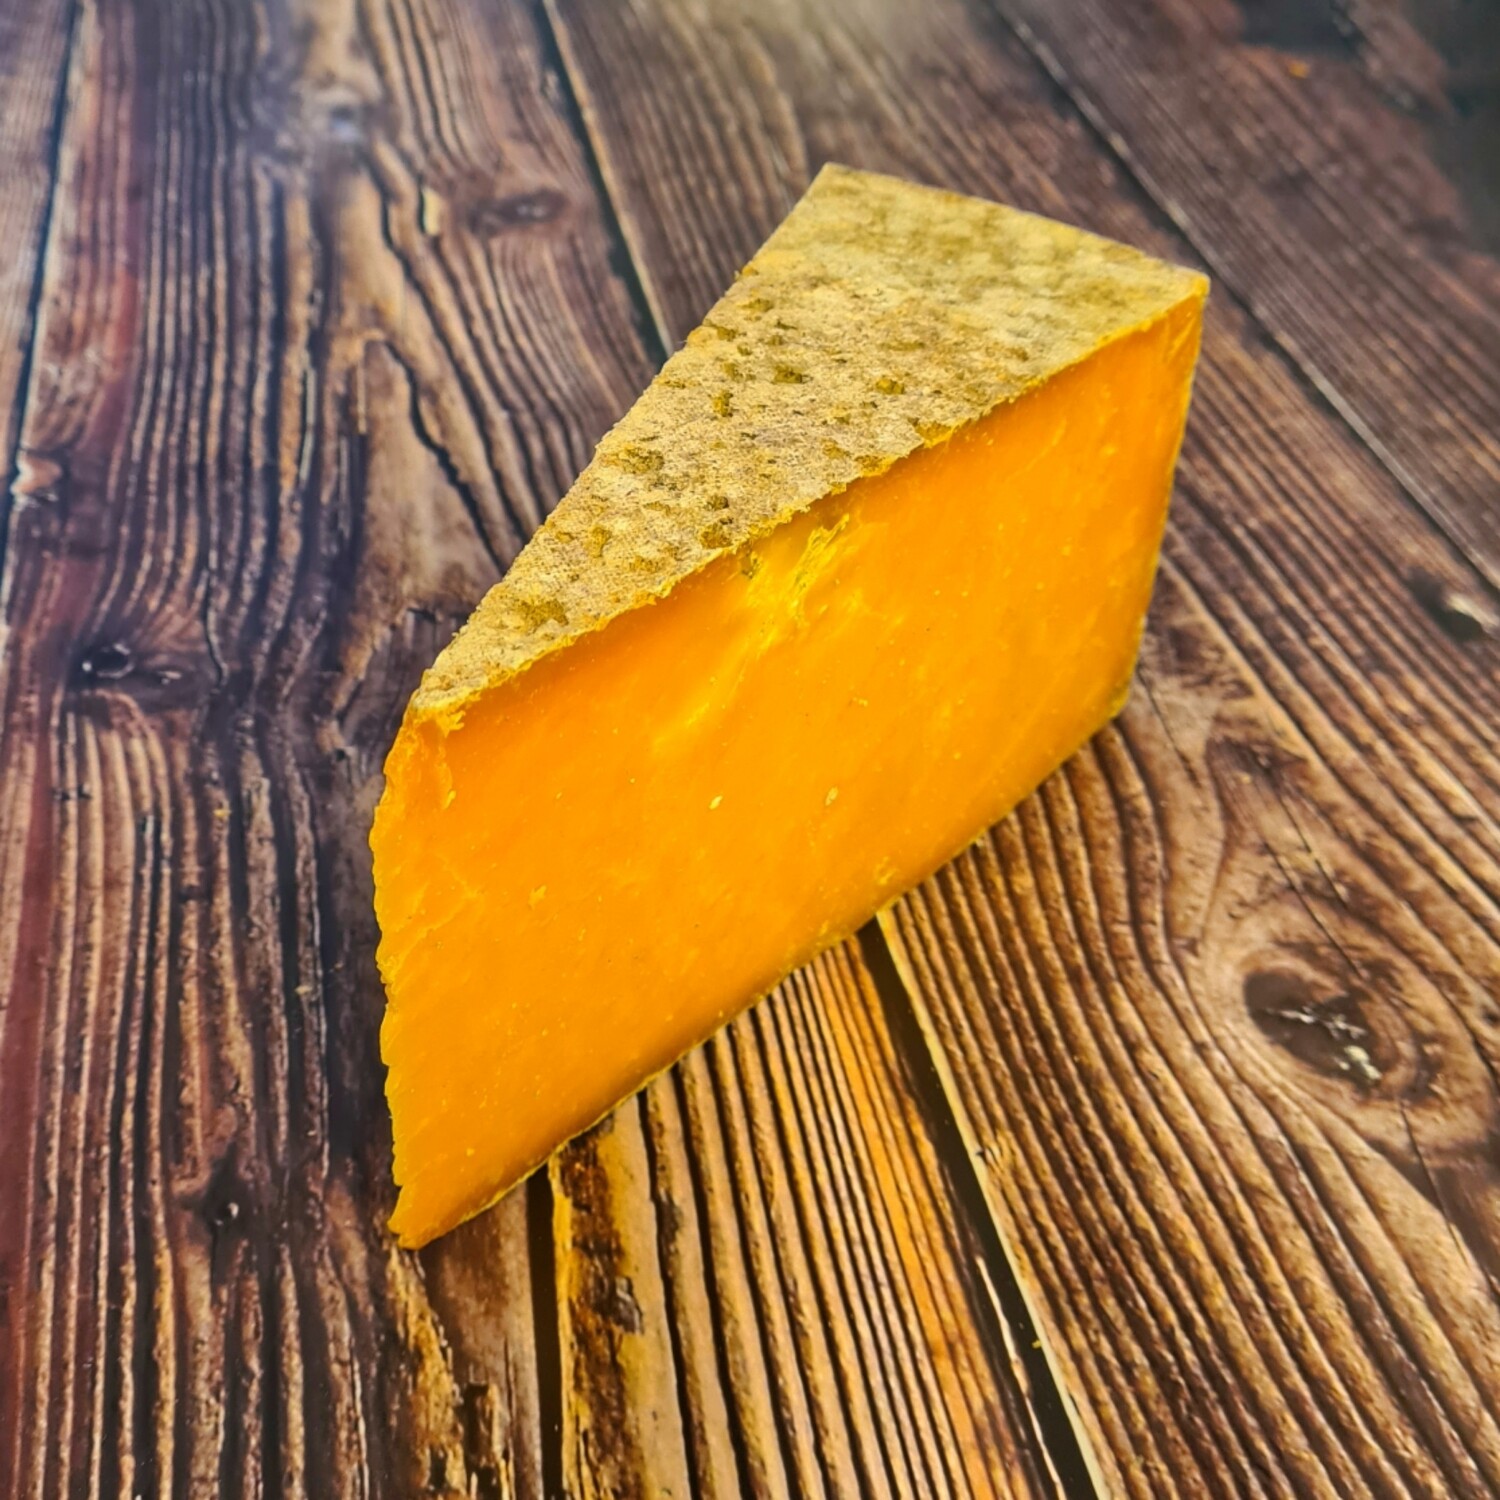 Preorder Sparkenhoe Red Leicester